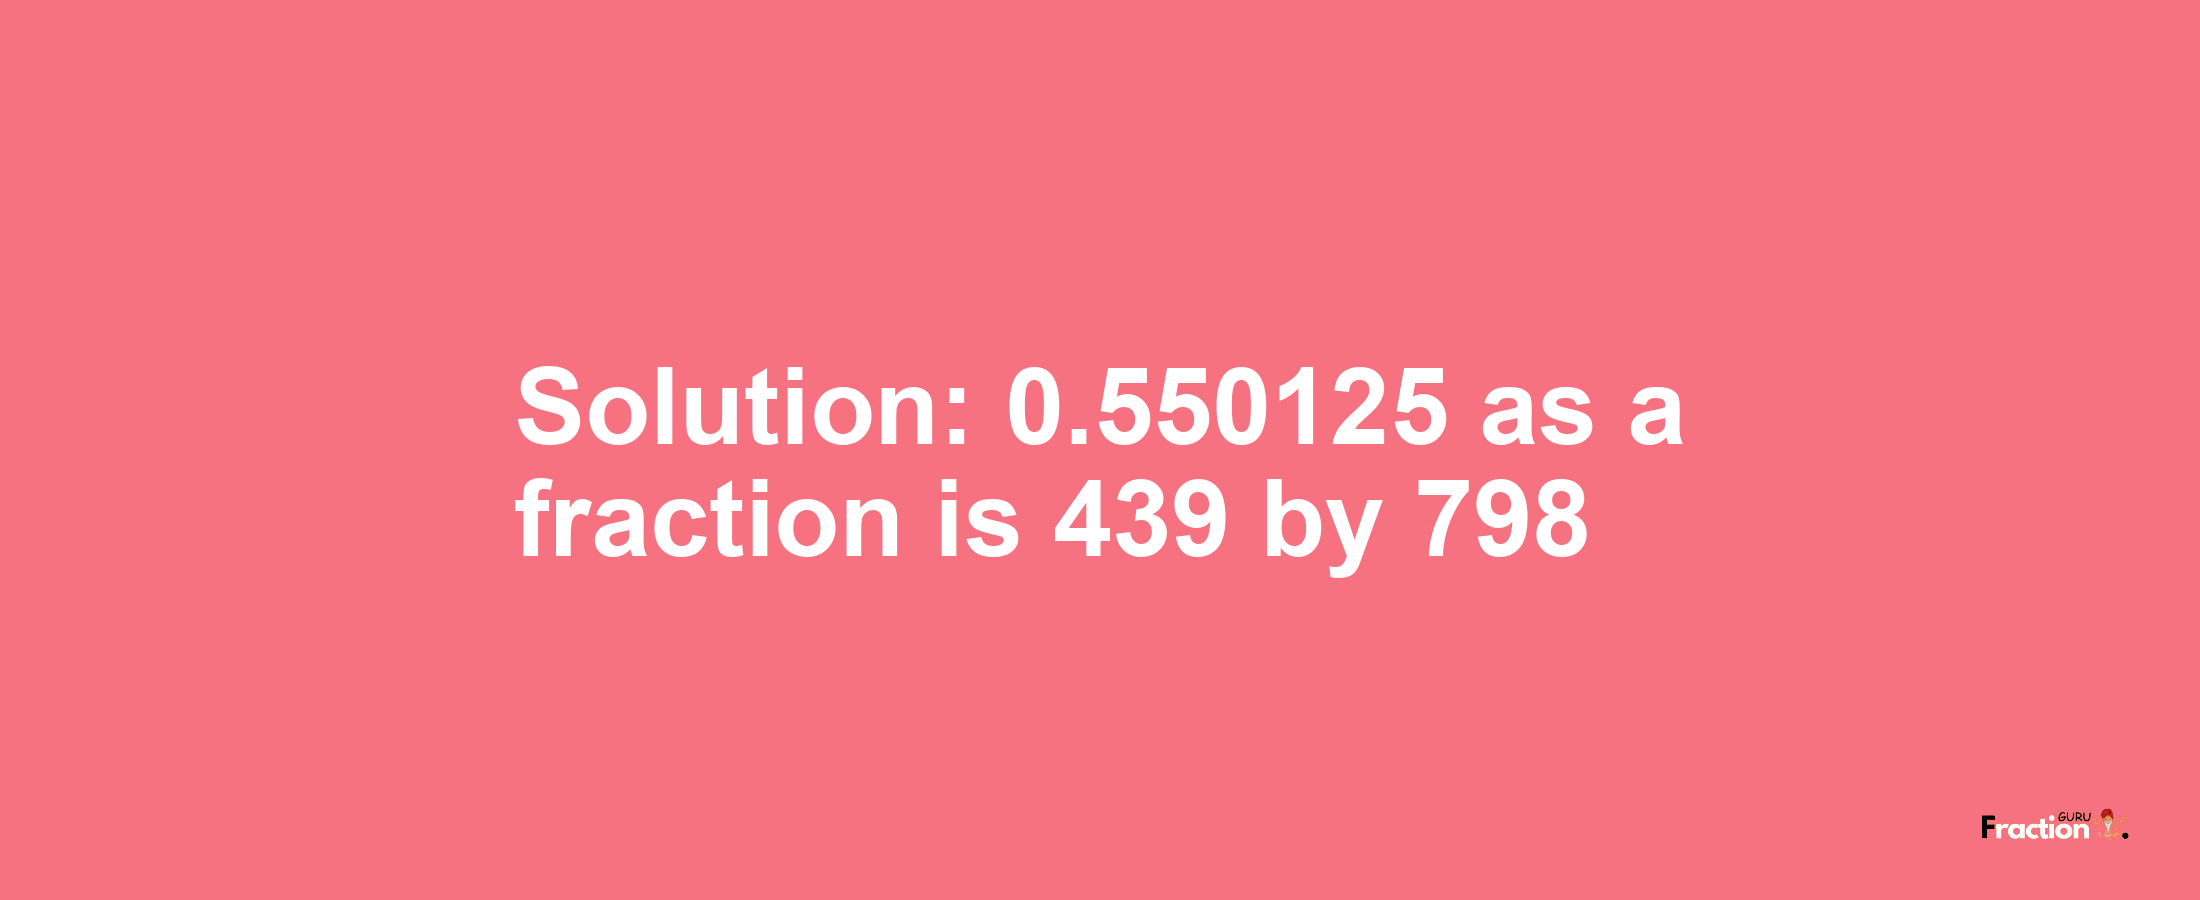 Solution:0.550125 as a fraction is 439/798